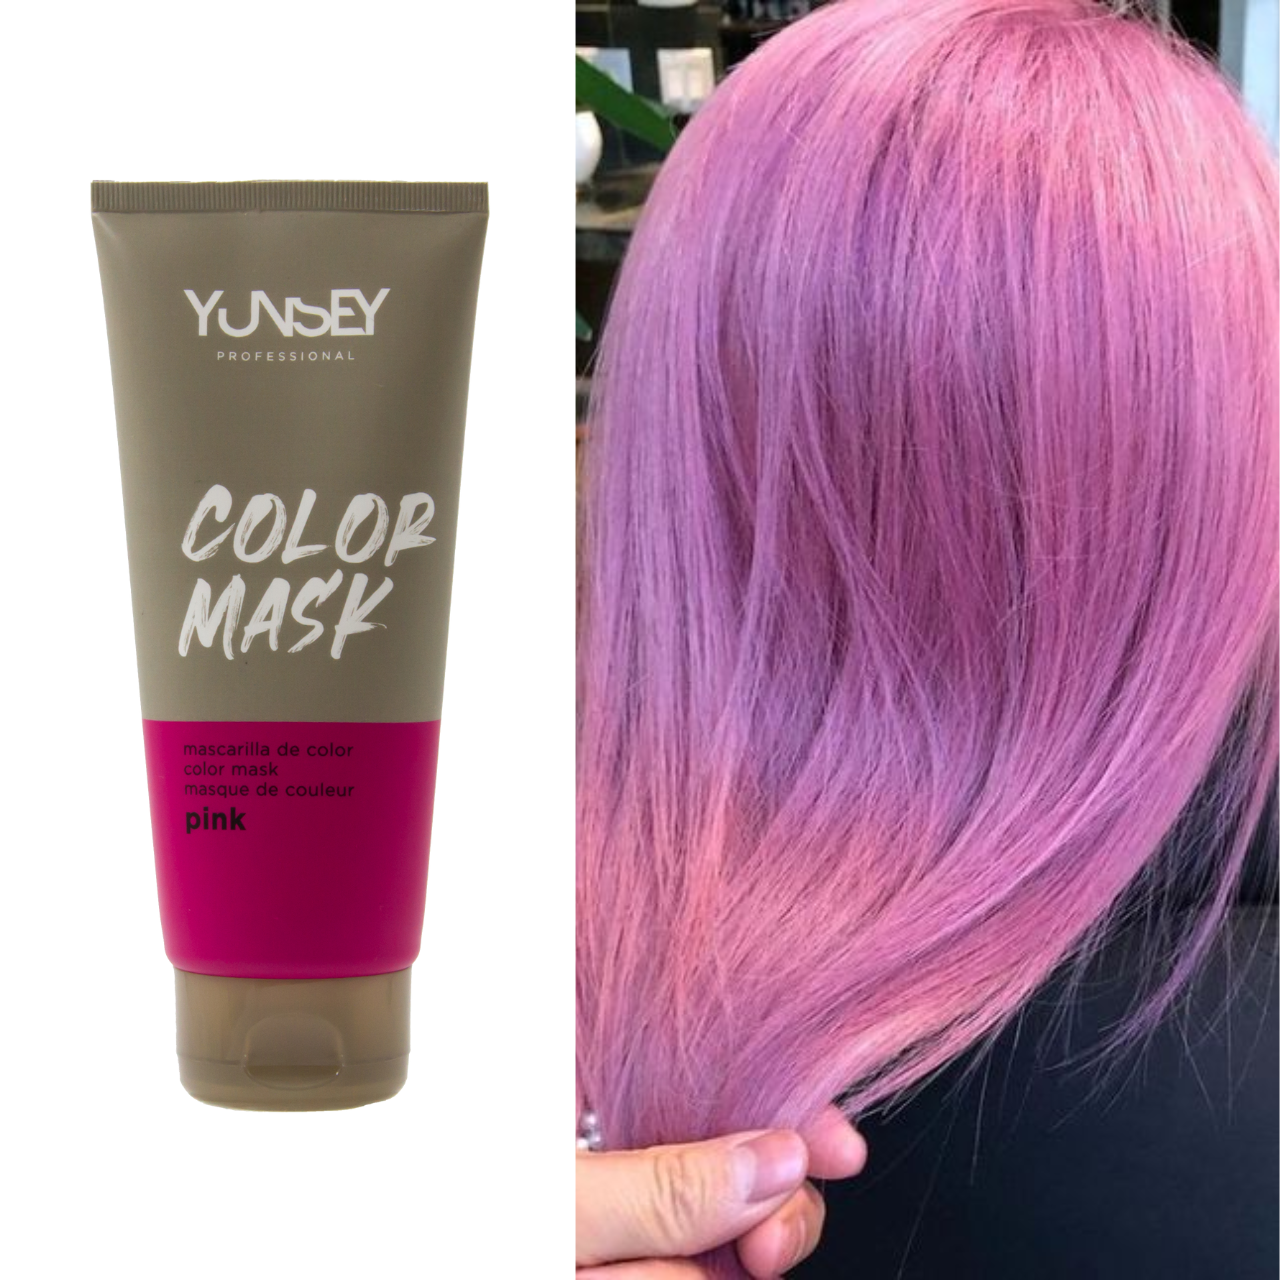 Color Mask Yunsey màu Pink (hồng)